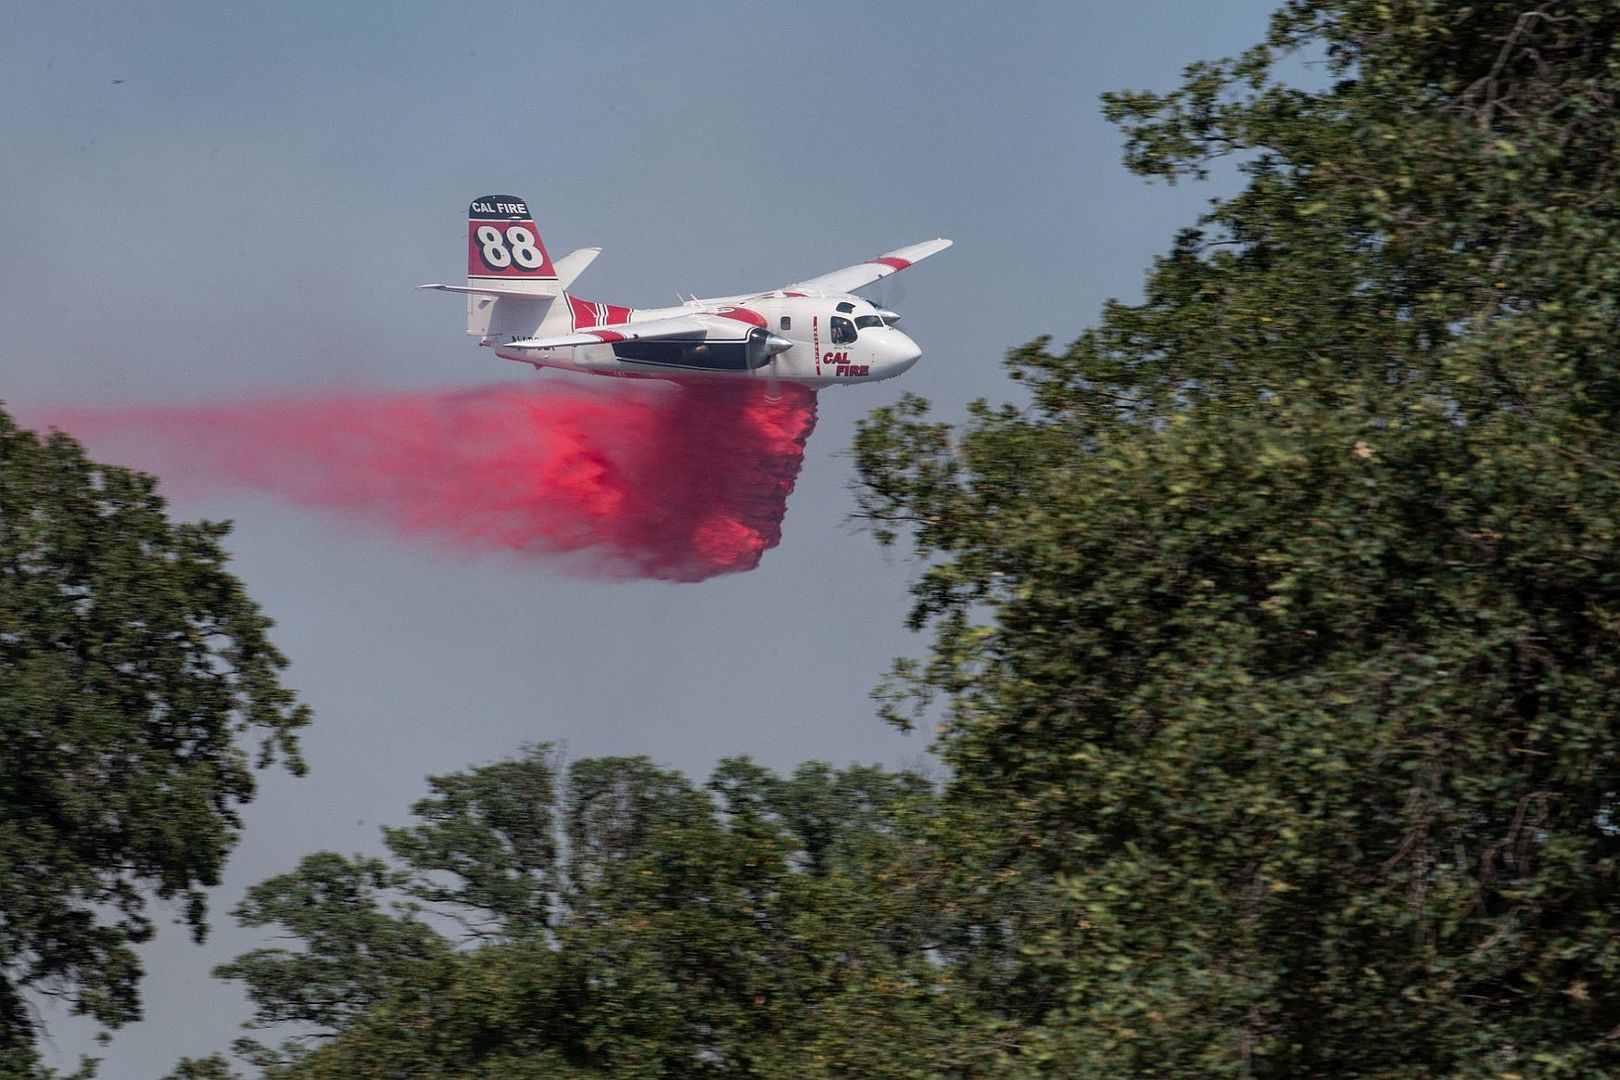 2T Airtanker Drops Fire Retardant On The Intanko Fire June 8 2021 At Beale Air Force Base California